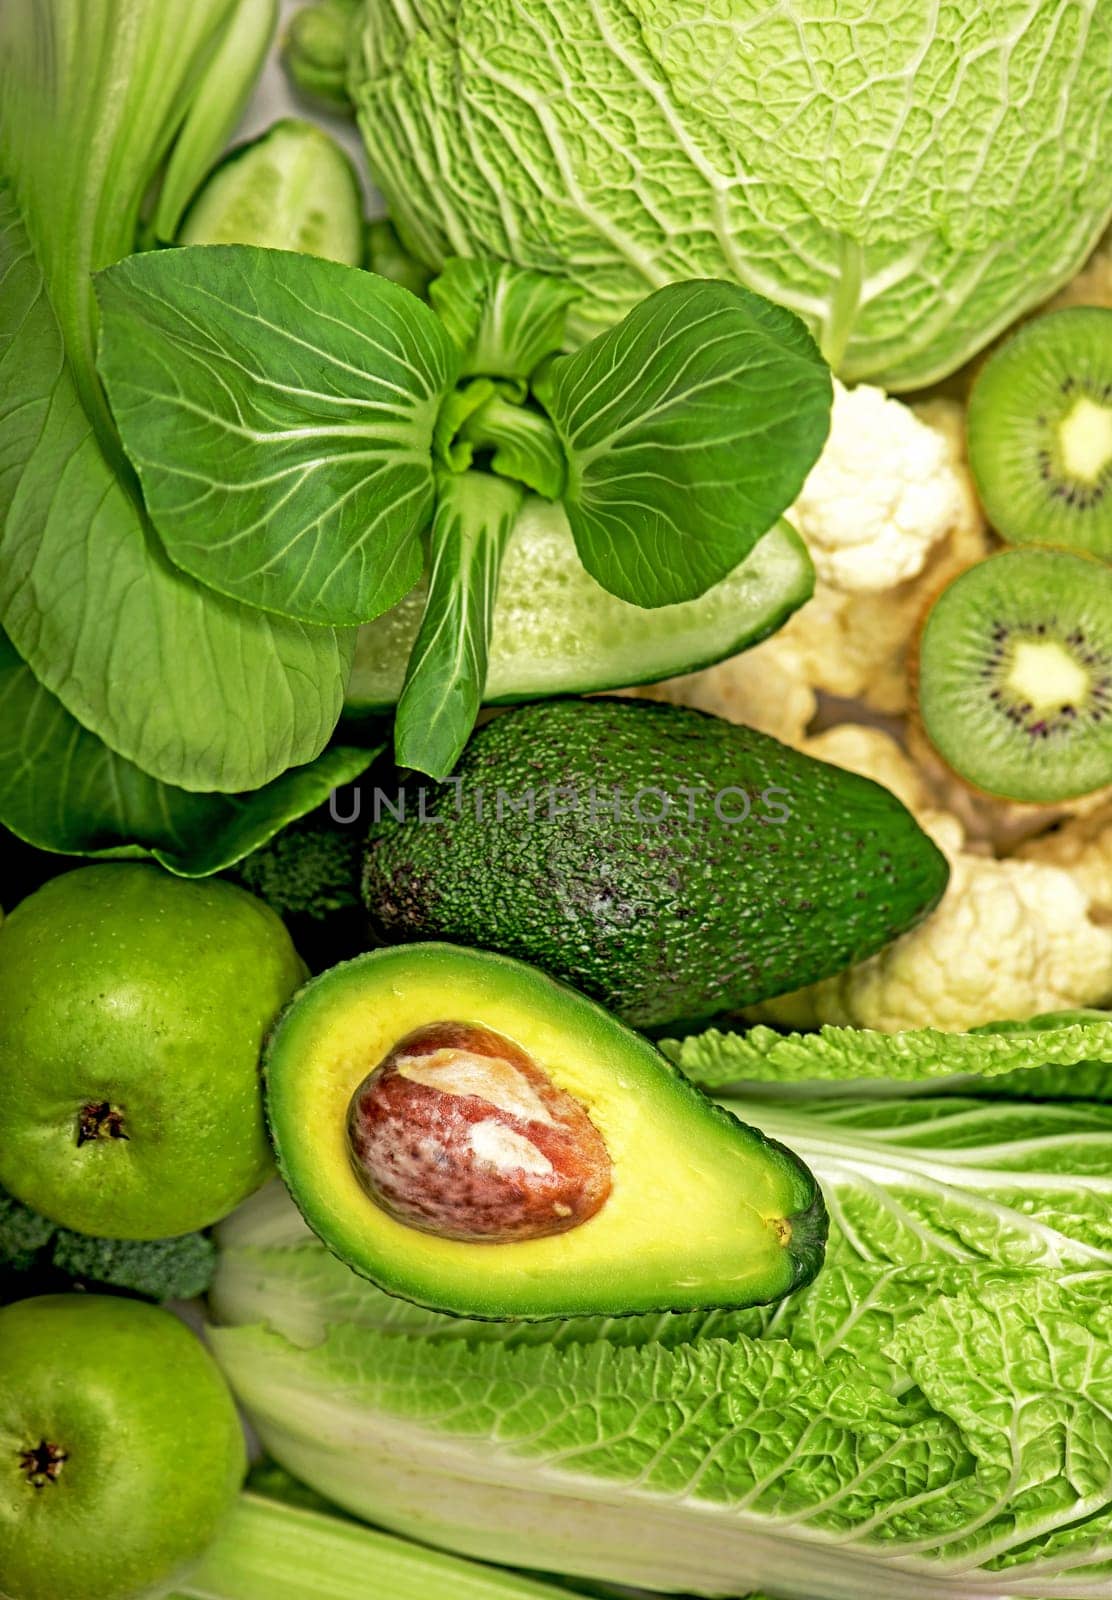 green still life. avocado, cabbage, apples, kiwi and other green vegetables